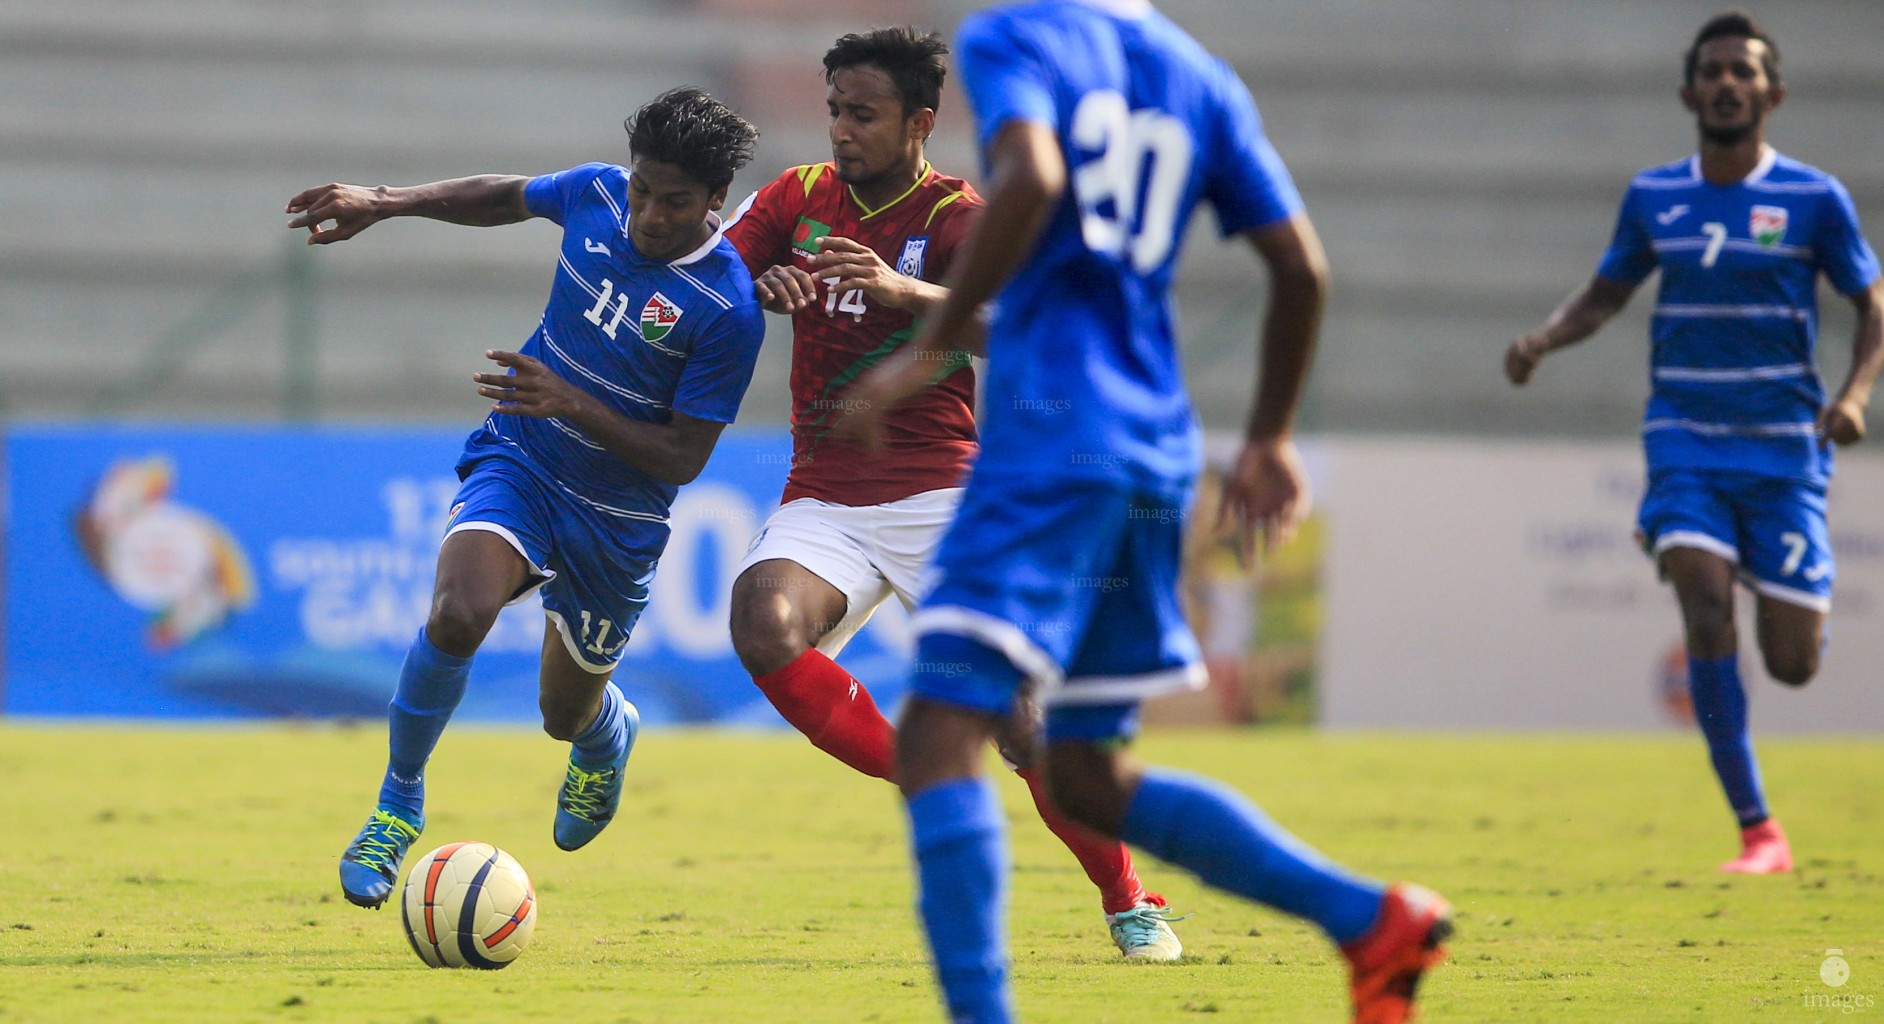 Maldives U23 national football team played against  Bangladesh U23 team in the South Asian Games Football event in Guwahati, India, Friday, February 15, 2016. (Images.mv Photo: Mohamed Ahsan)